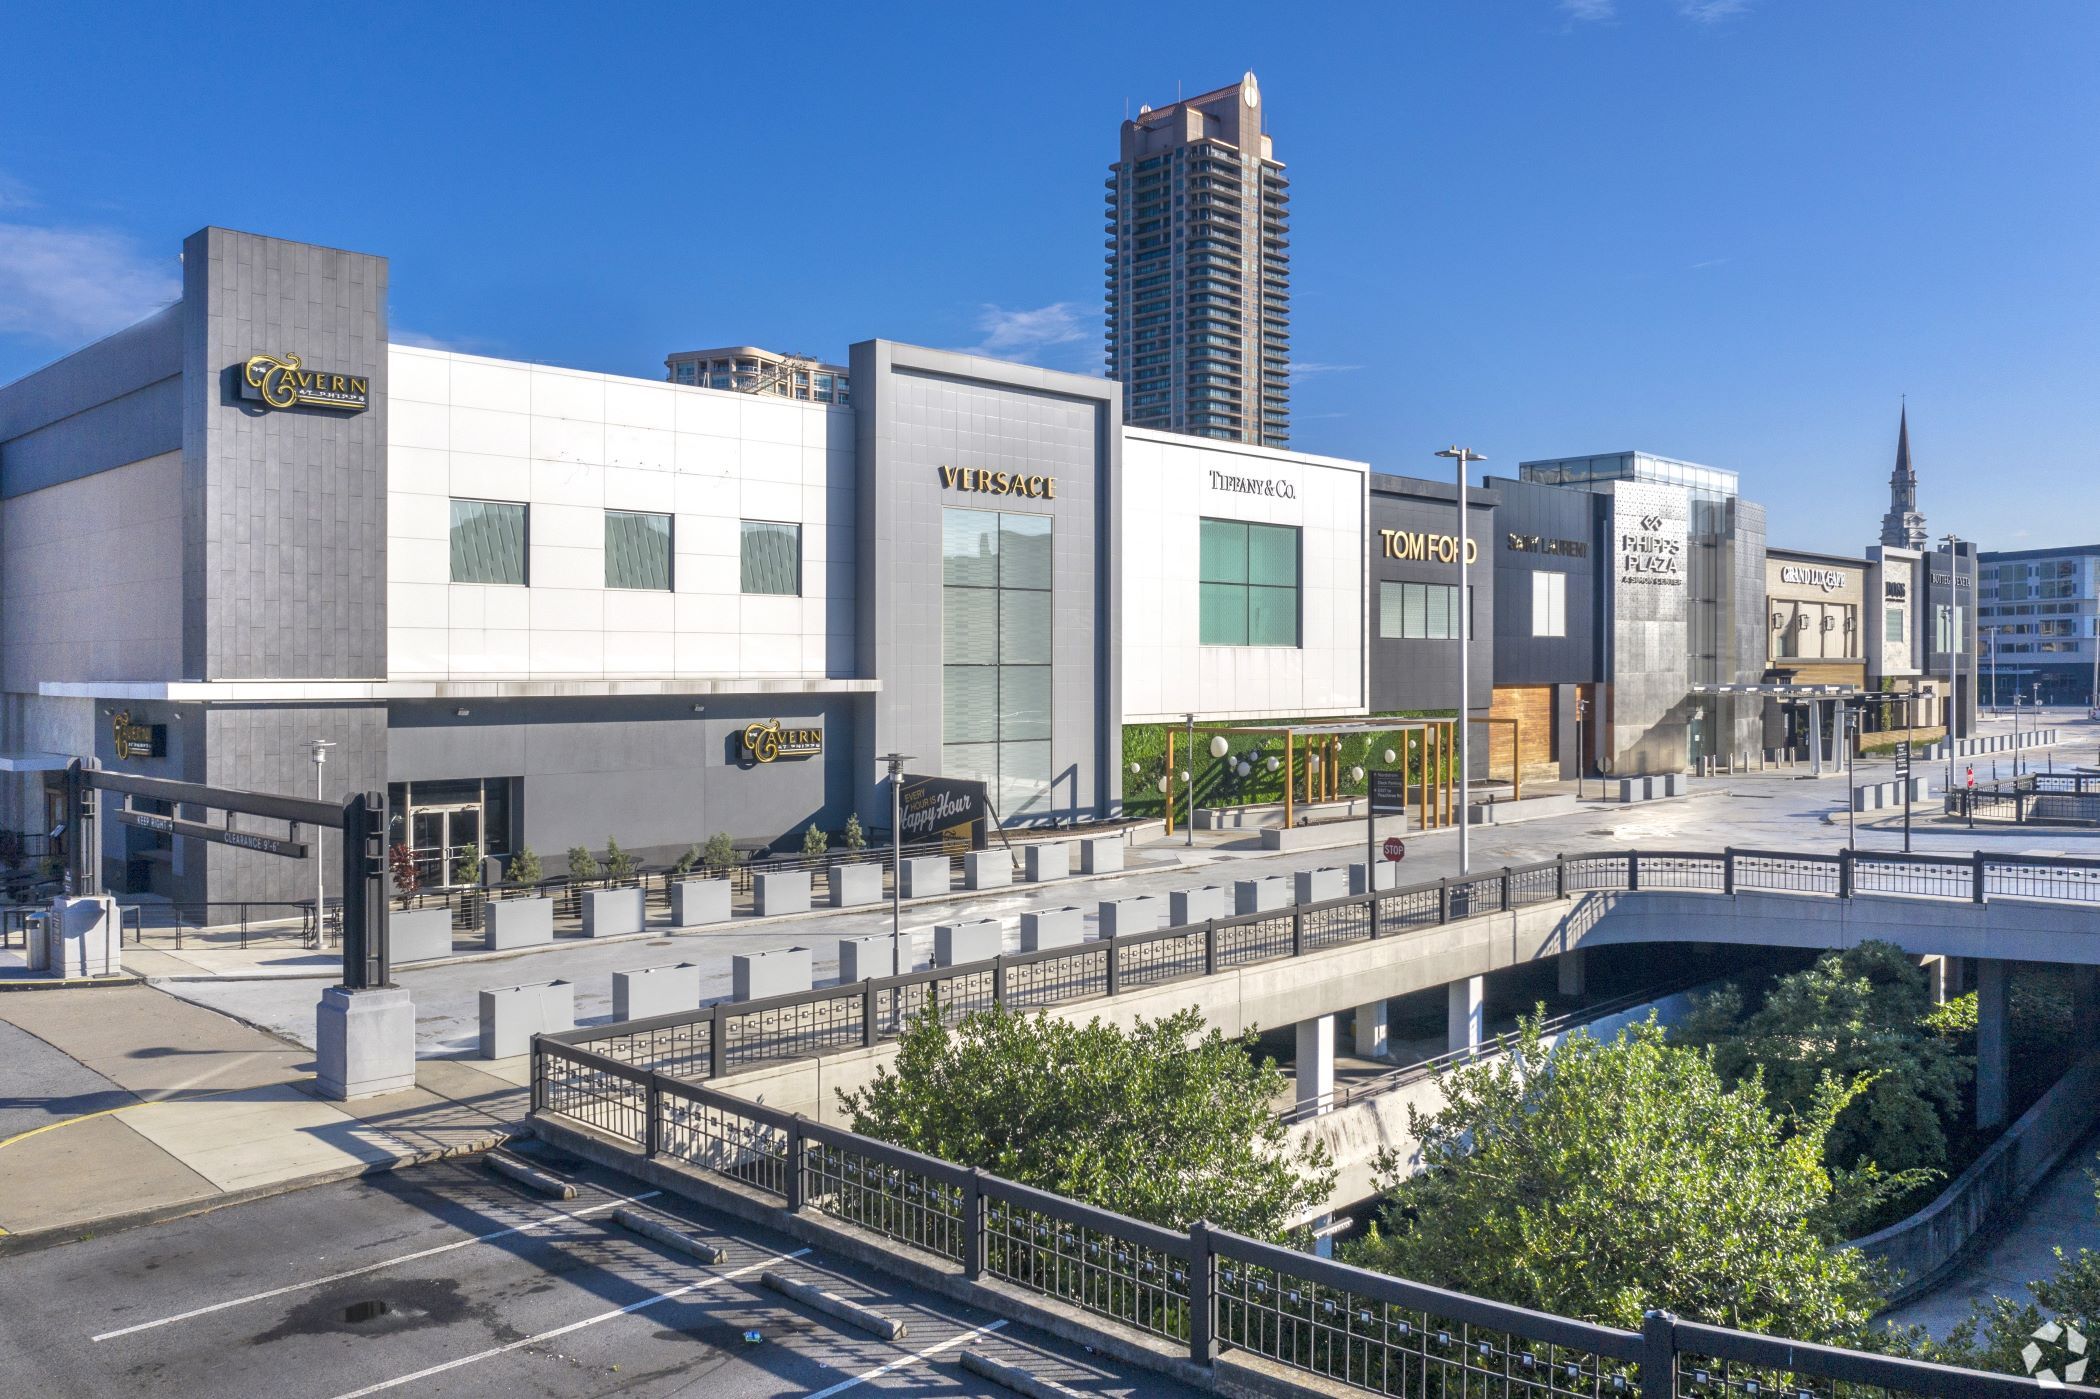 Phipps Plaza in Atlanta, with its new Nobu hotel and restaurant, could serve as a model for Simon Property Group’s residential and hospitality expansion projects across the United States. (CoStar)